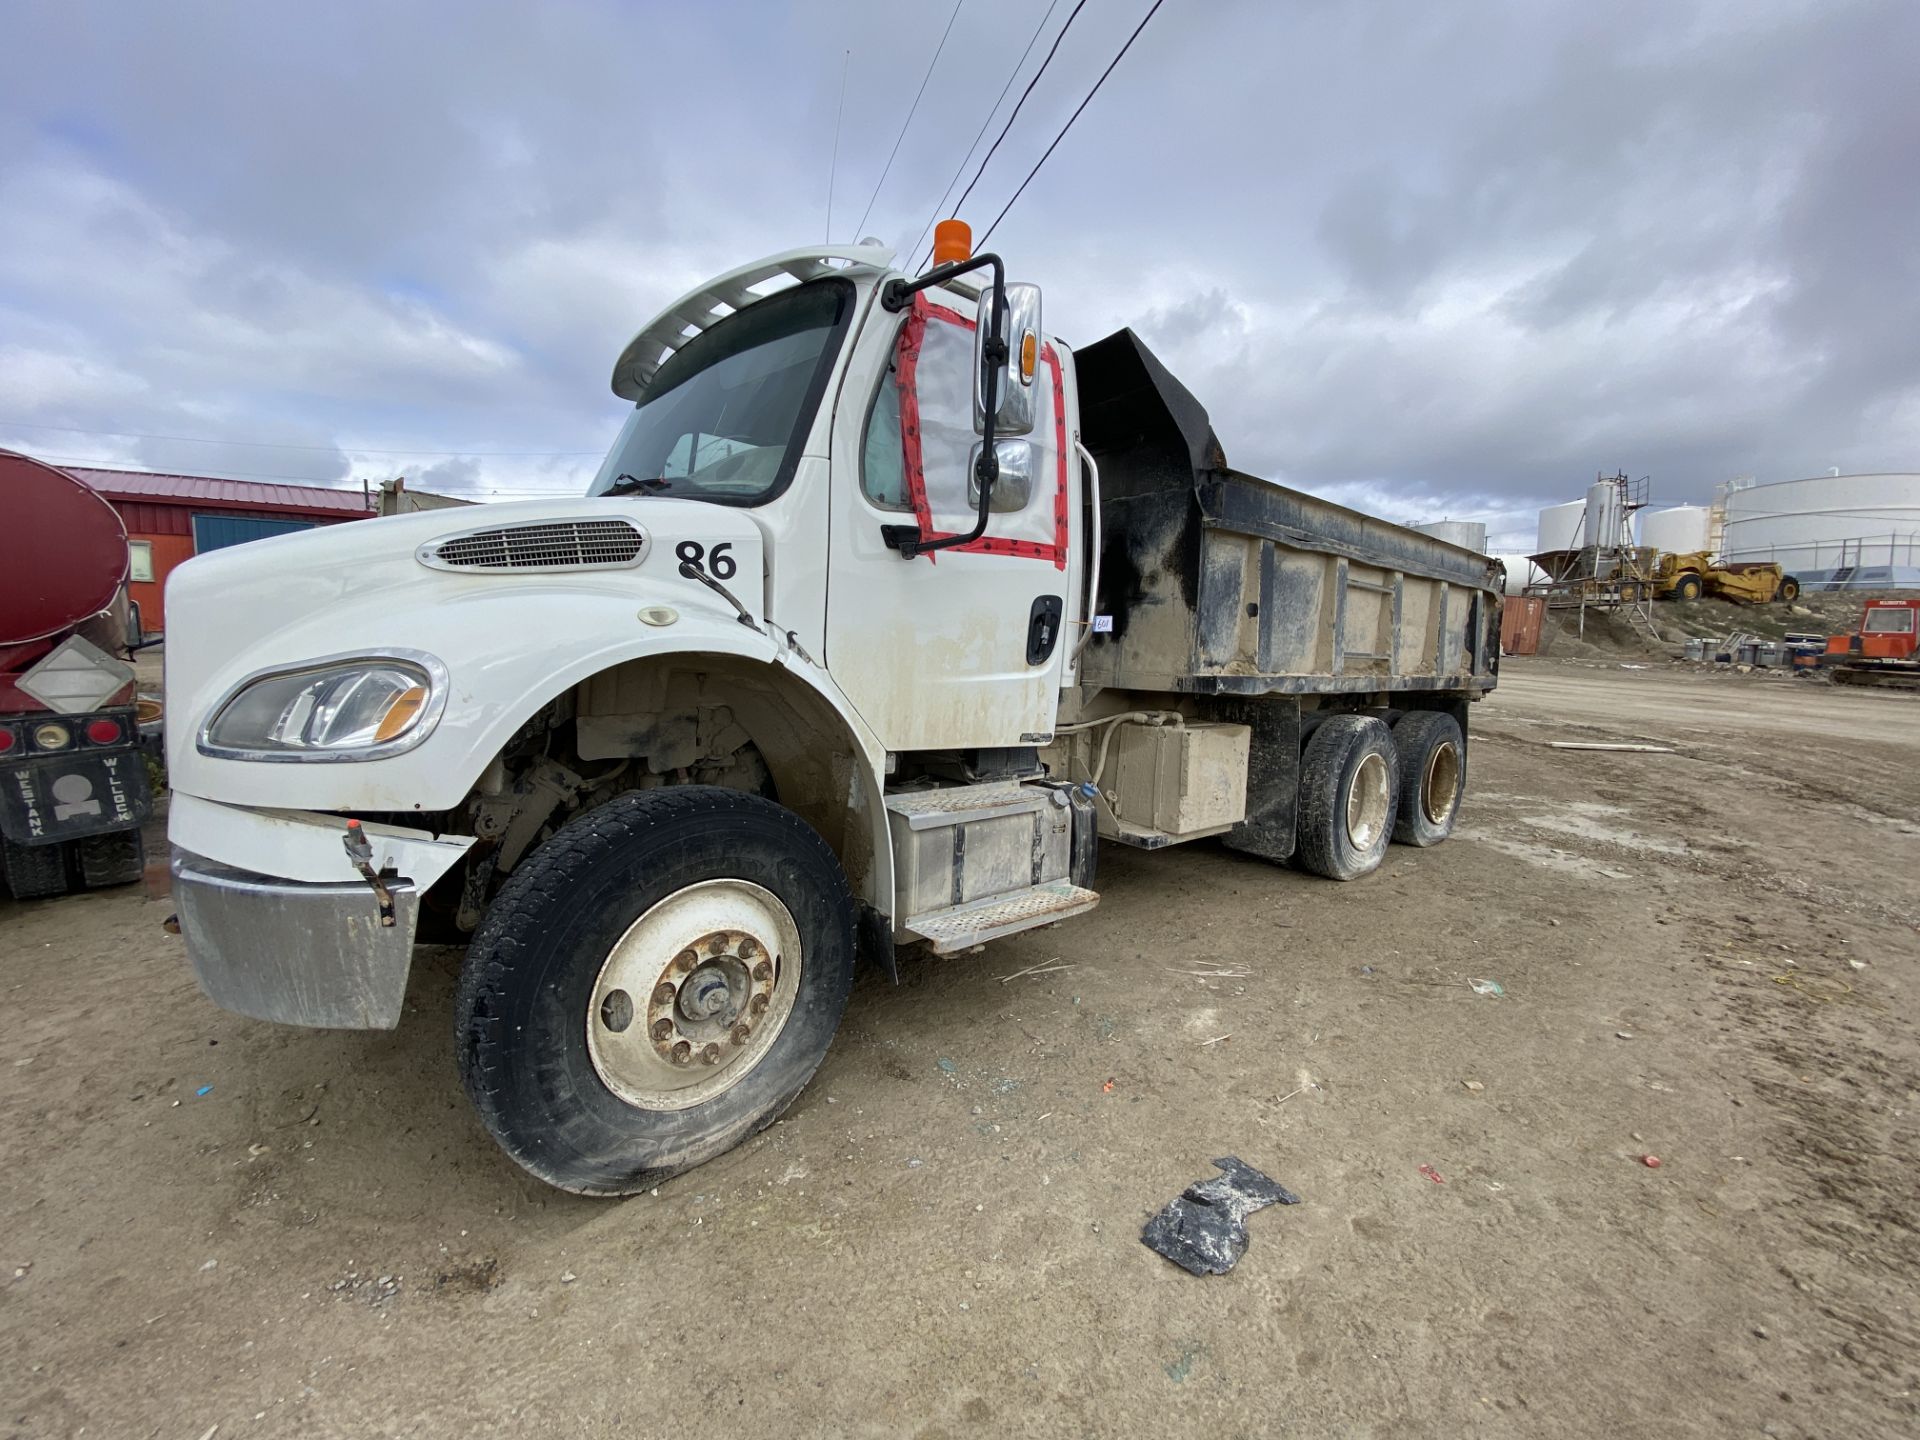 2013 FREIGHTLINER T/A DUMP TRUCK, 71610KM, S/N 1FVHCYBS1DHFF5220 - M, UNKNOWN CONDITION